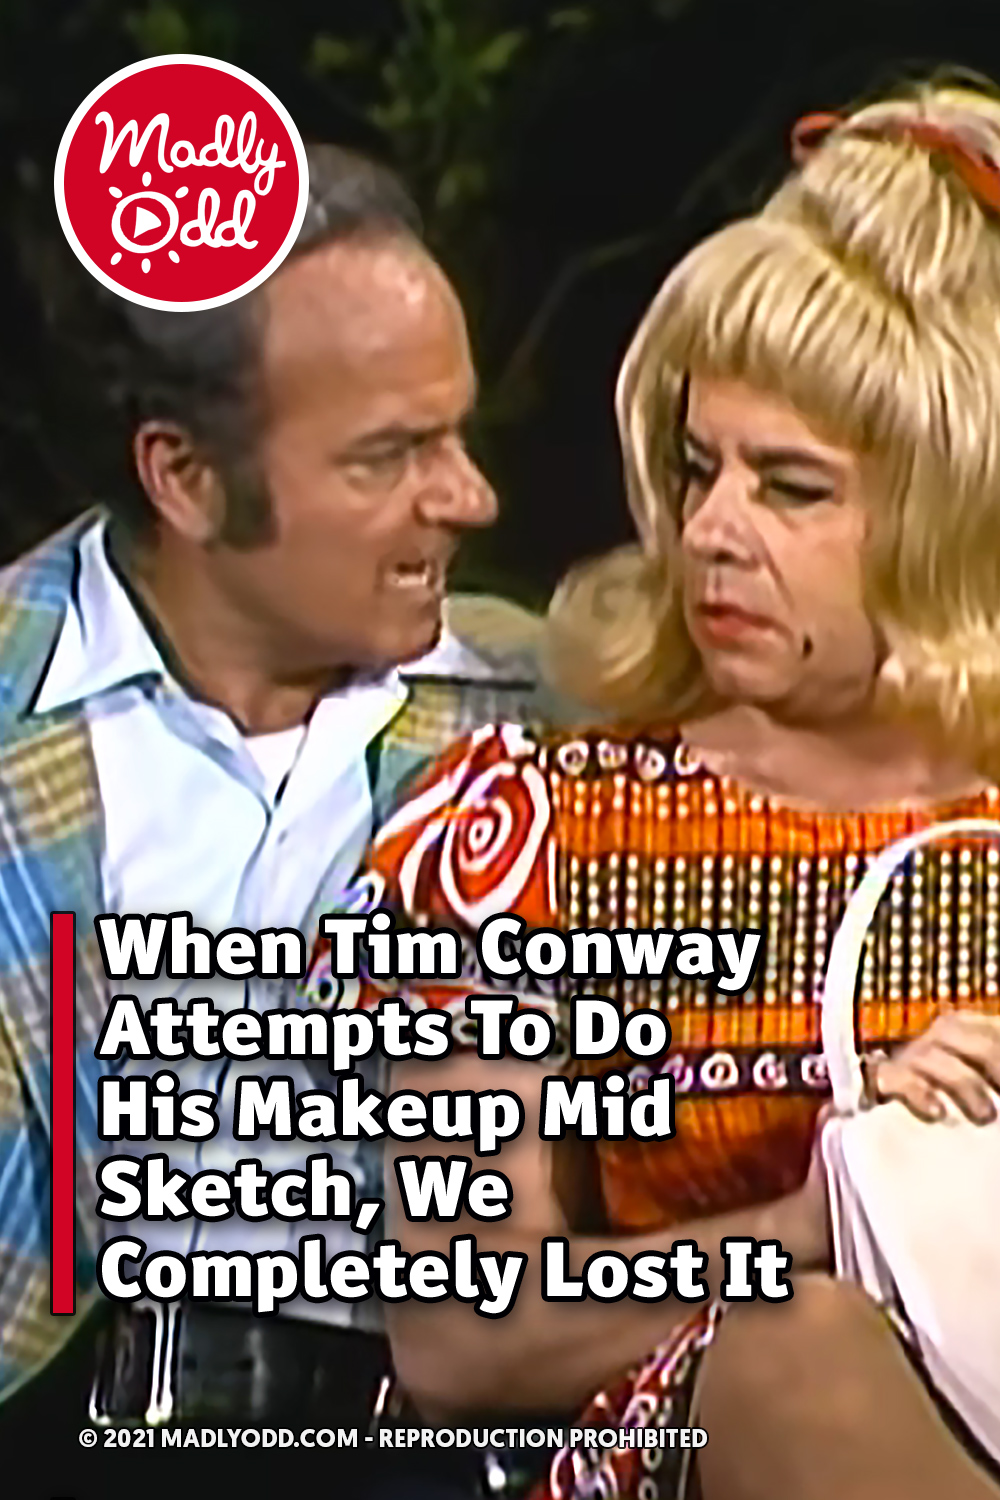 When Tim Conway Attempts To Do His Makeup Mid Sketch, We Completely Lost It